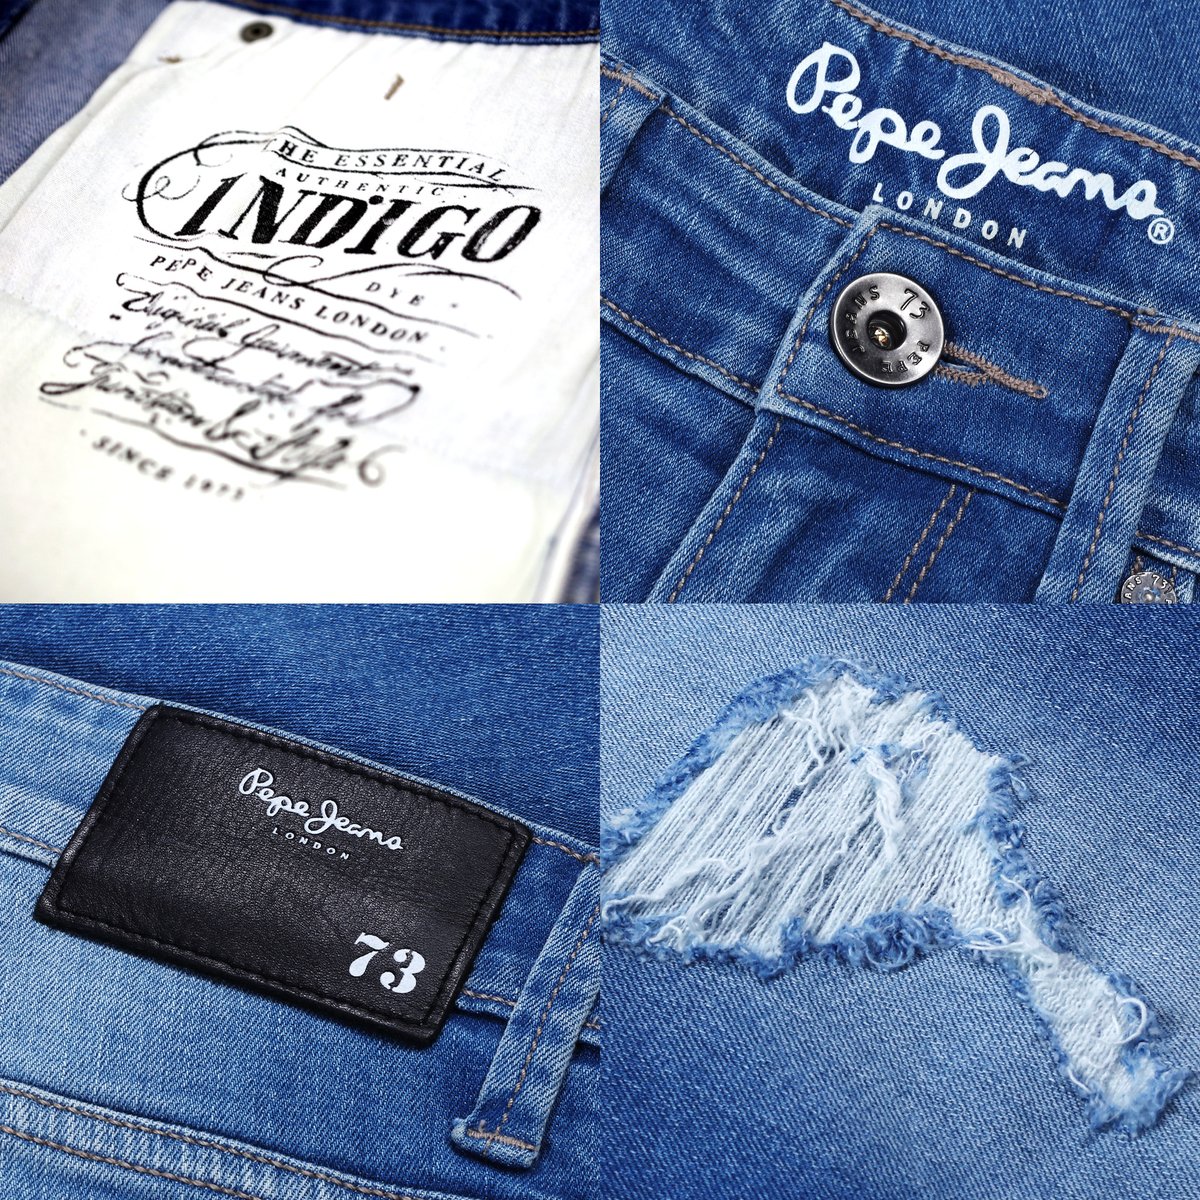 Pepe Jeans India on Twitter: "It's all about the details! Shop the latest  fashion fits &amp; styles from our #PepeJeans73 collection! #SpringSummer  #SS21 #NewCollectionLaunch #PepeJeansIndia #Denim #Jeans #MensFashion  #Menswear #OOTD https://t.co ...